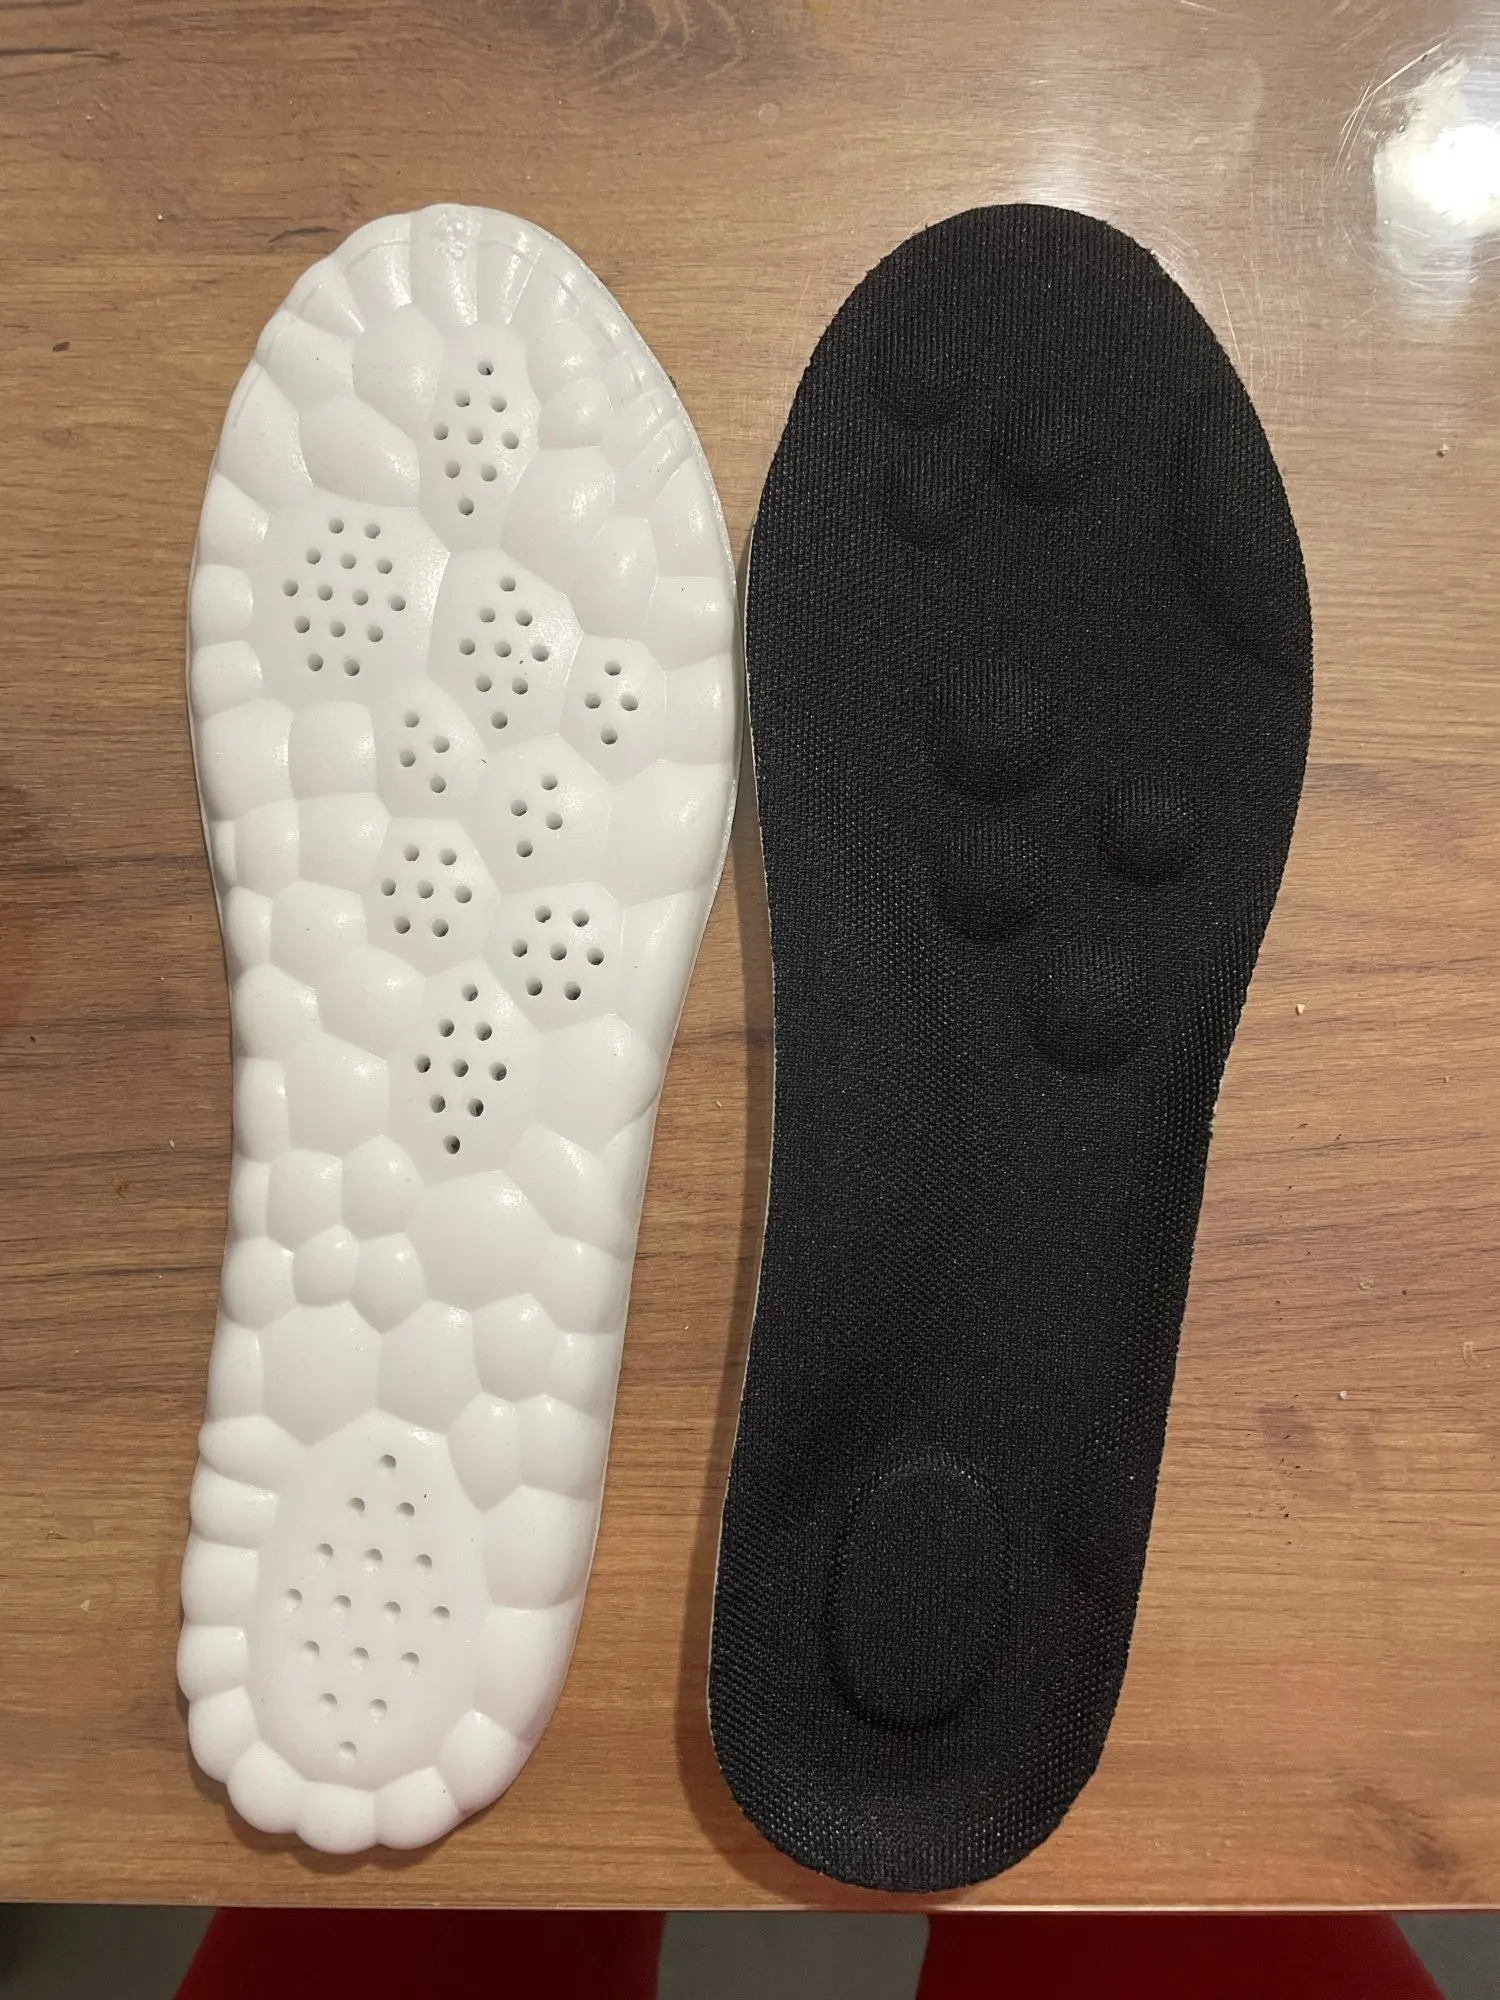 RMF-102 Powermax Full Length Basketball Shoes Insoles photo review